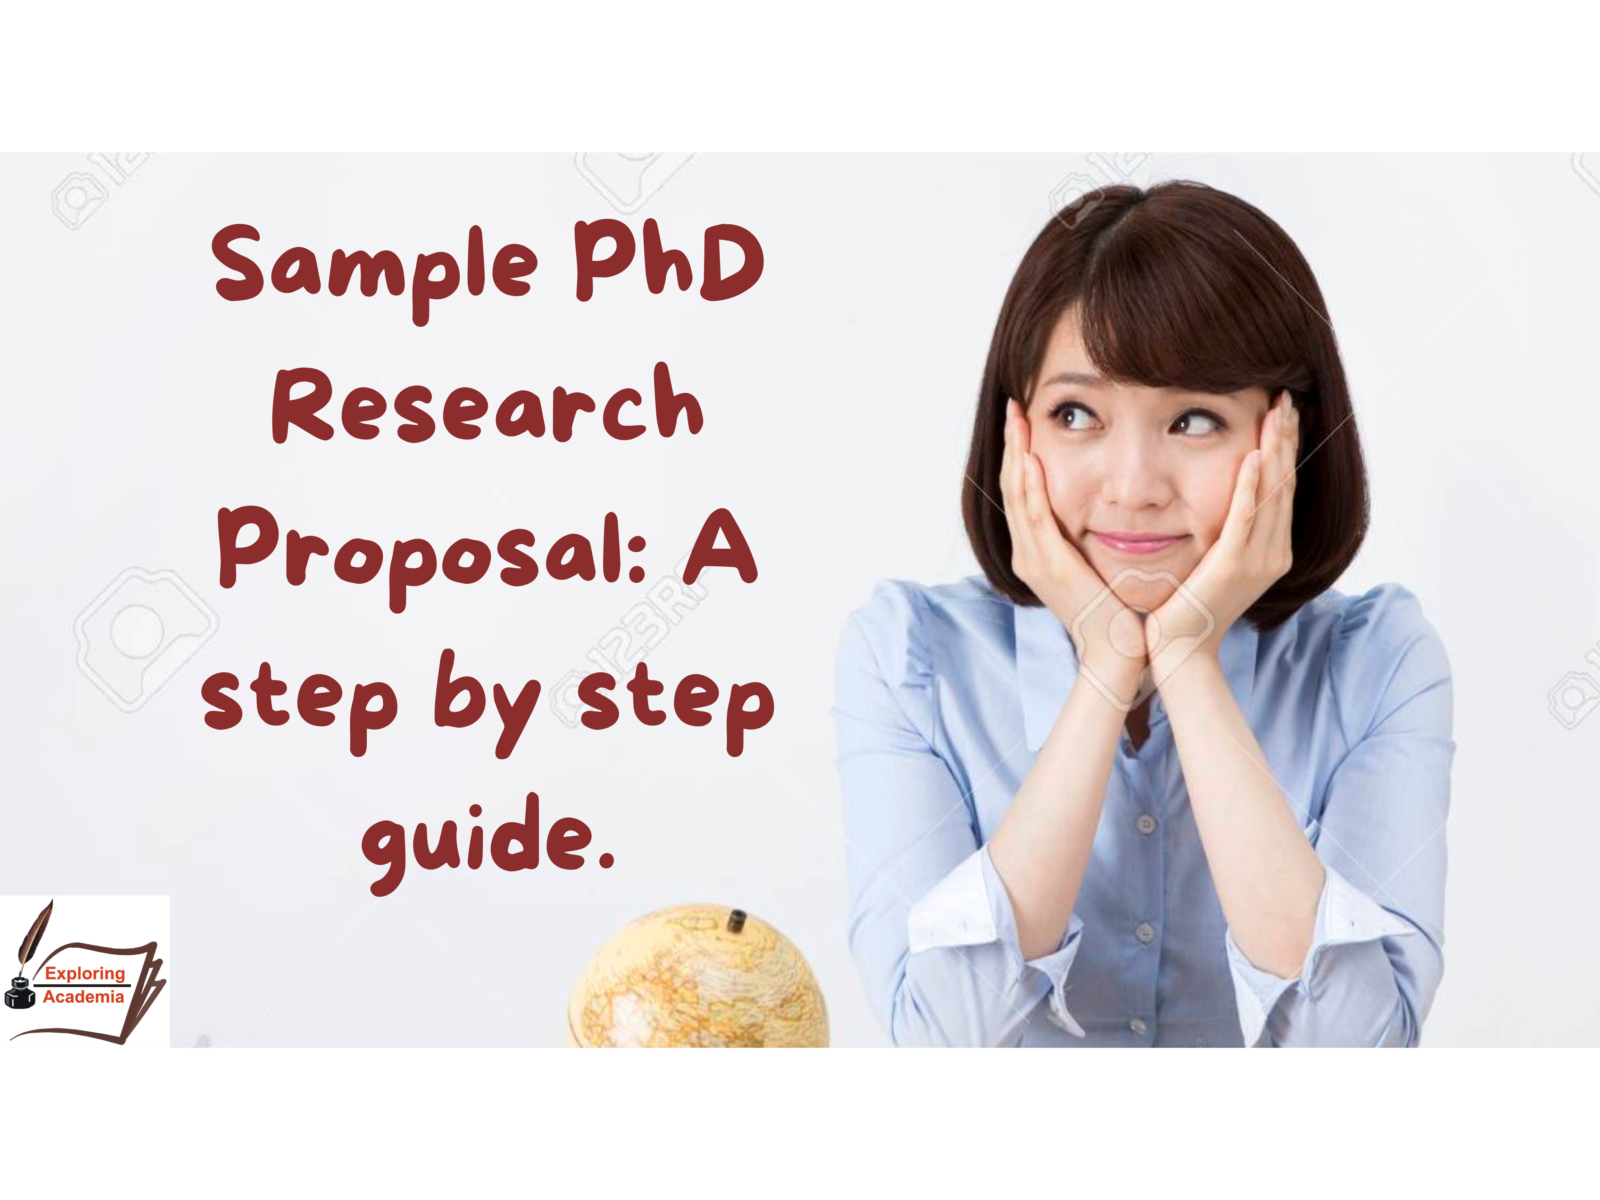 Sample PhD Research Proposal: A step by step guide.